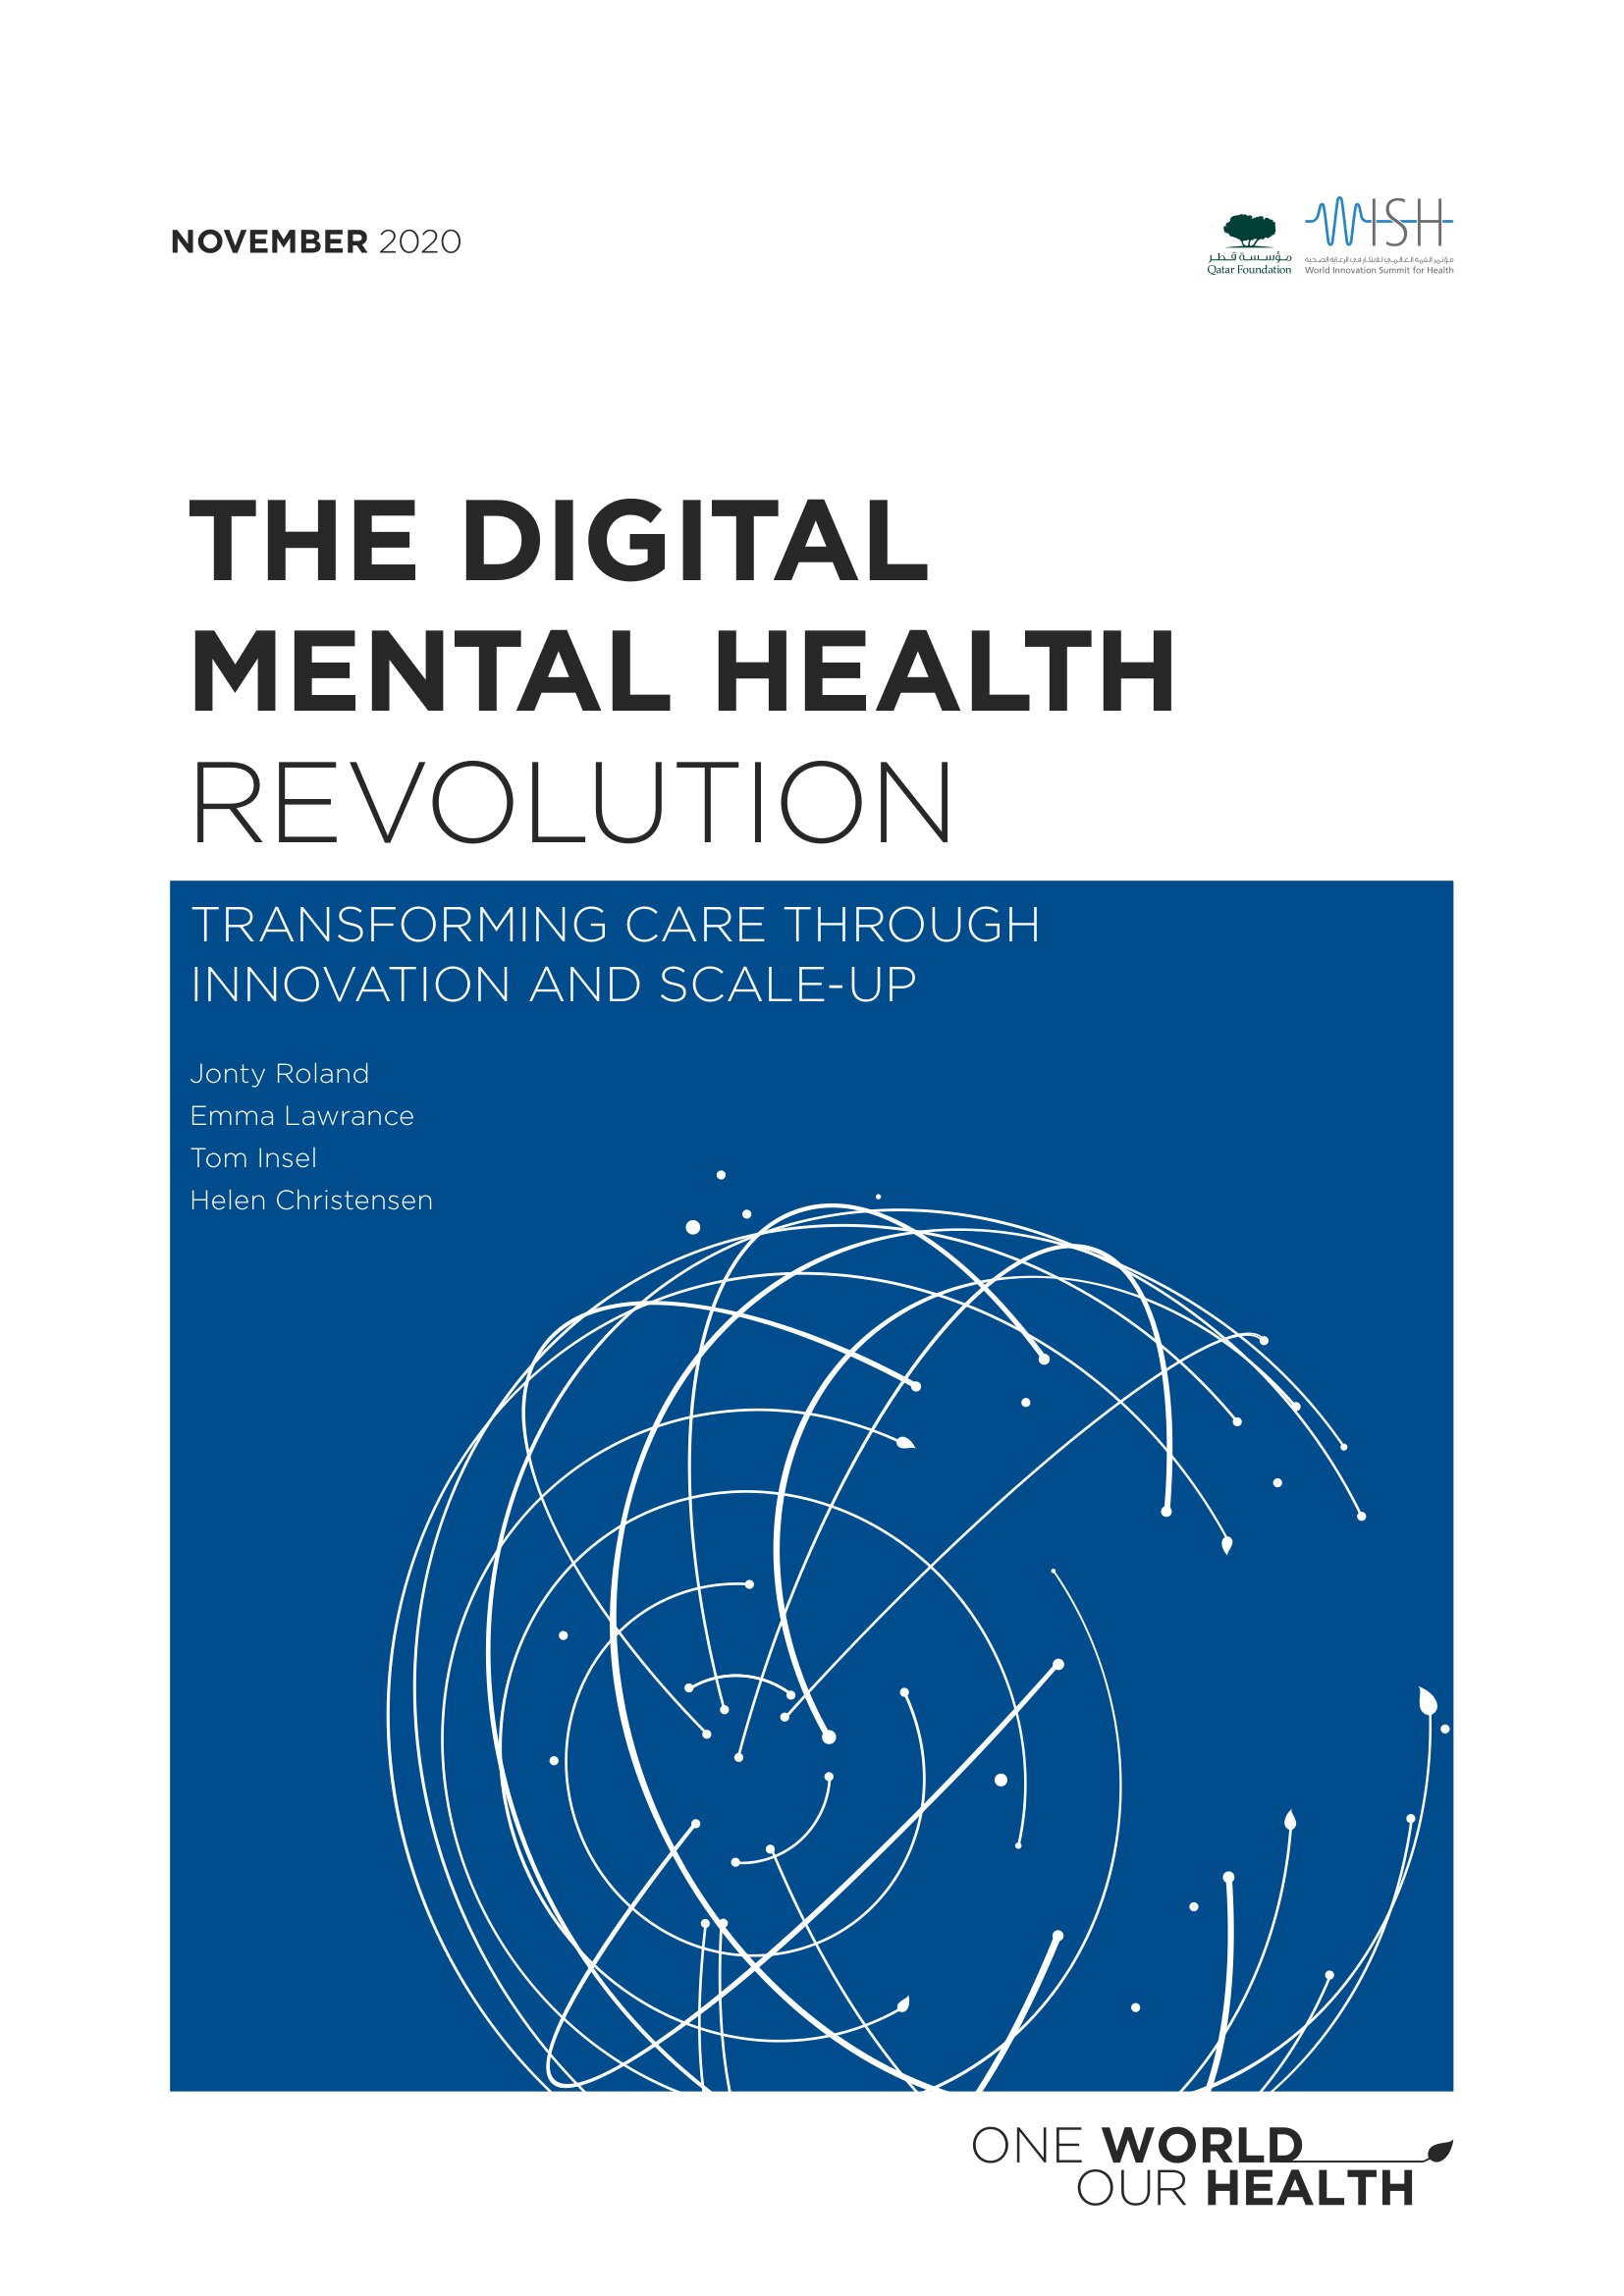 The Digital Mental Health Revolution: Transforming Care Through Innovation and Scale-Up